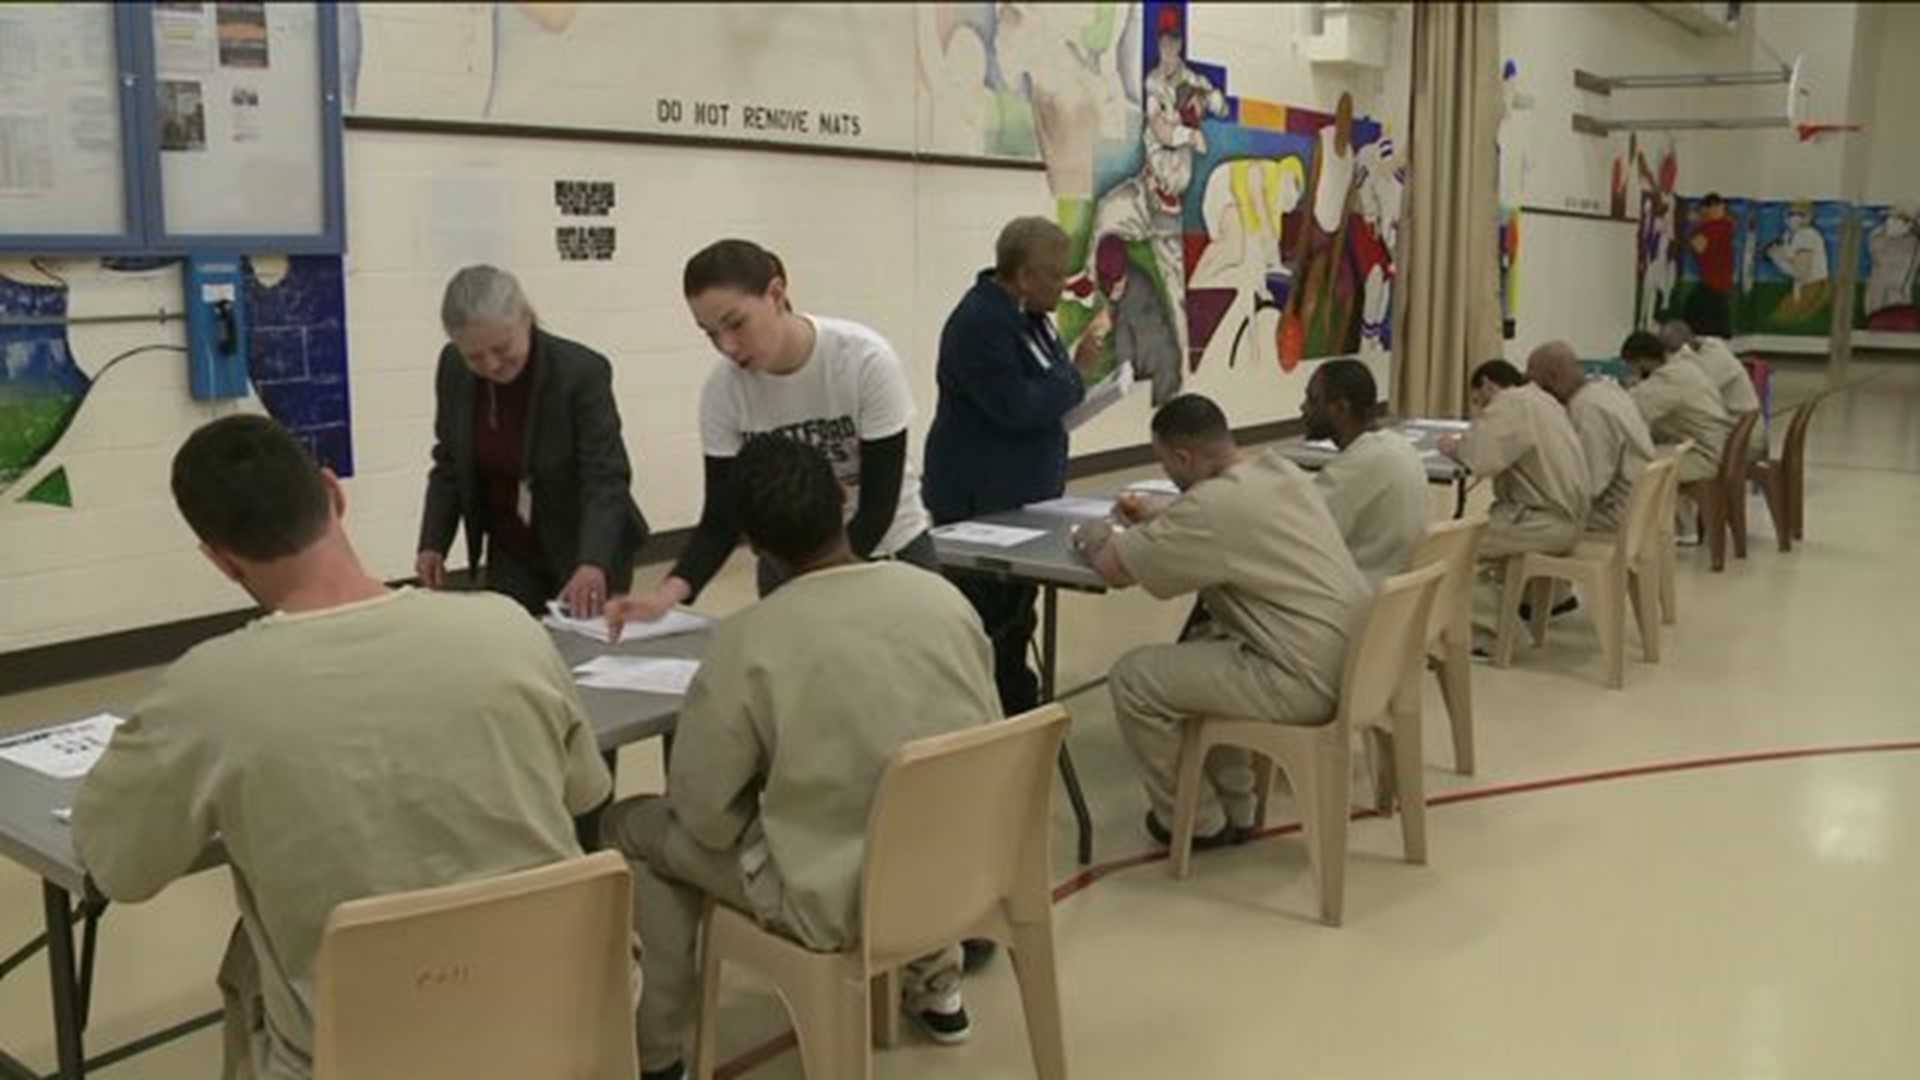 Getting inmates invovled in the local community